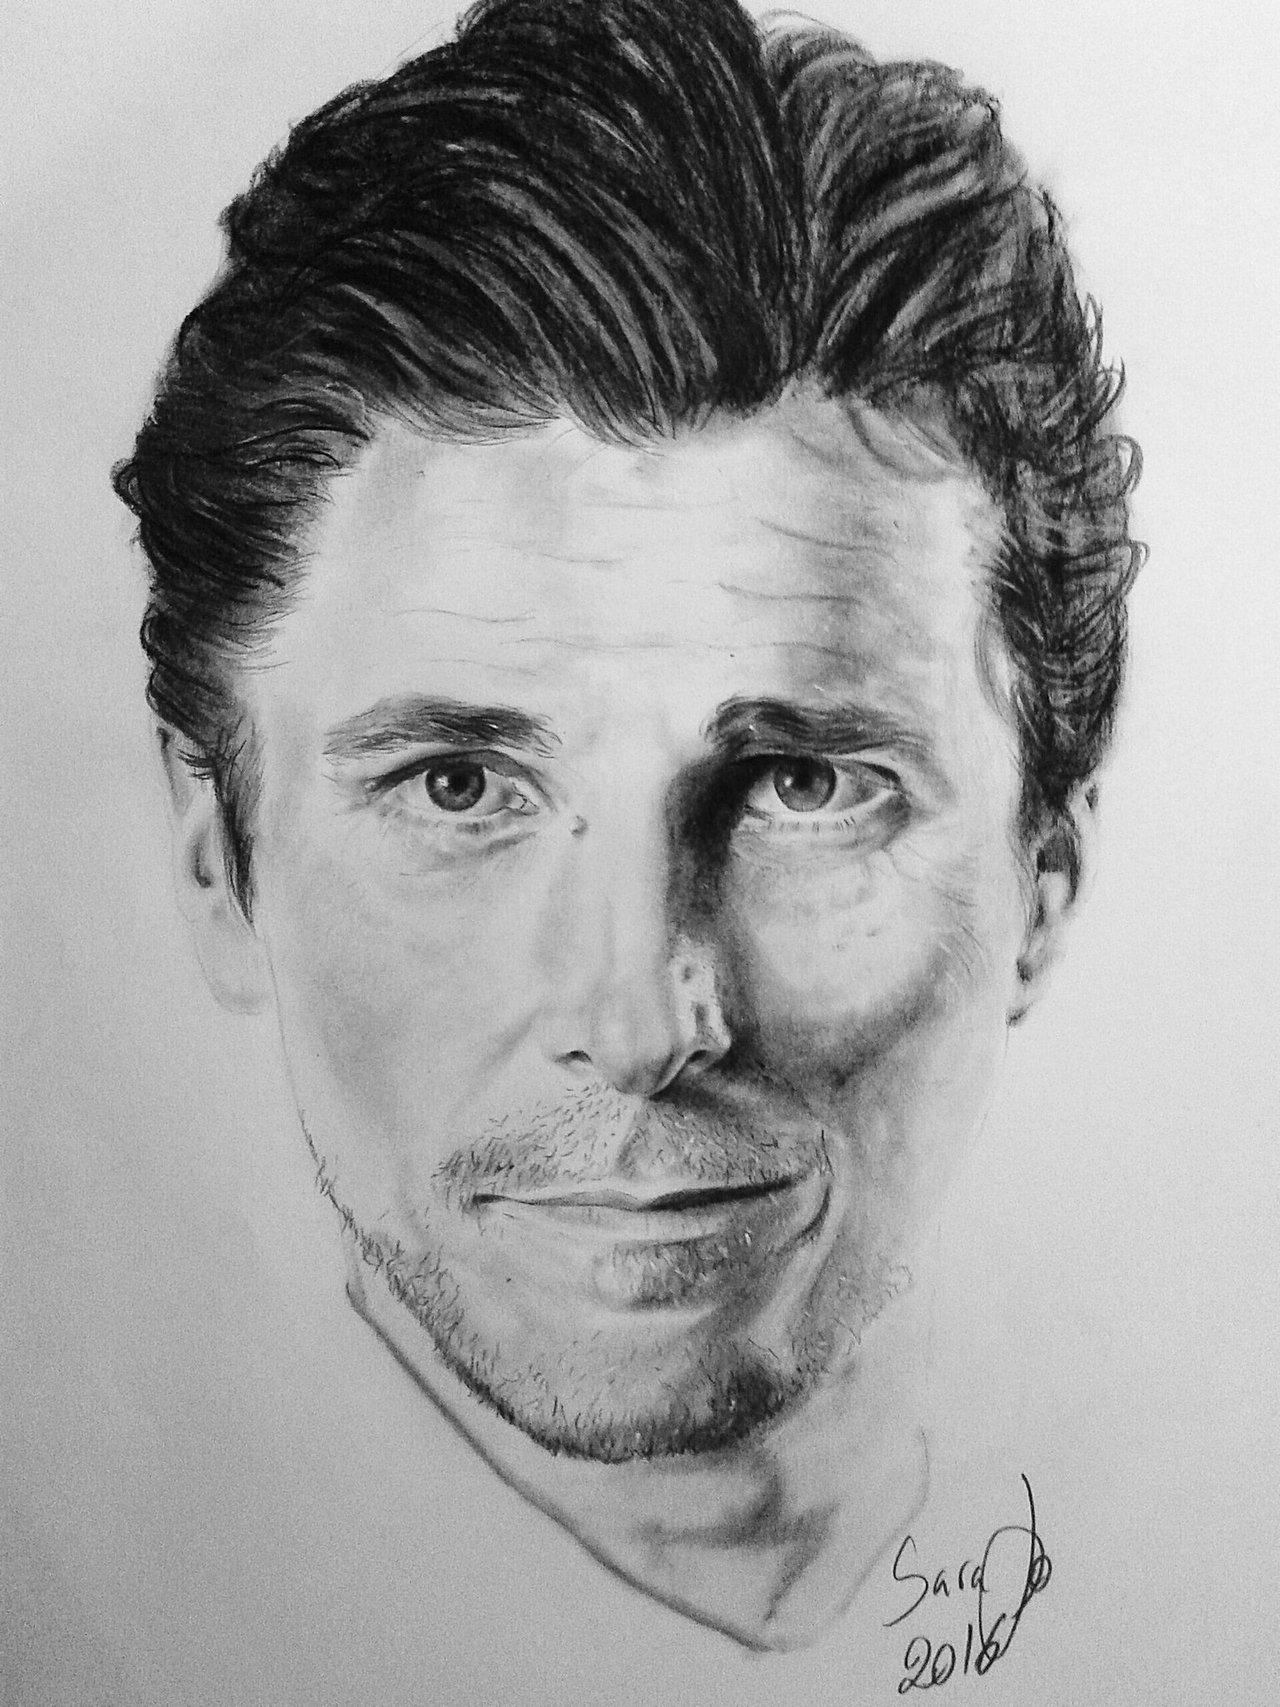 Here we go with the first drawing in 2016! Christian Bale  #ChristianBale #Art #Portrait #BedtimeSketch https://t.co/DWz06hxARO